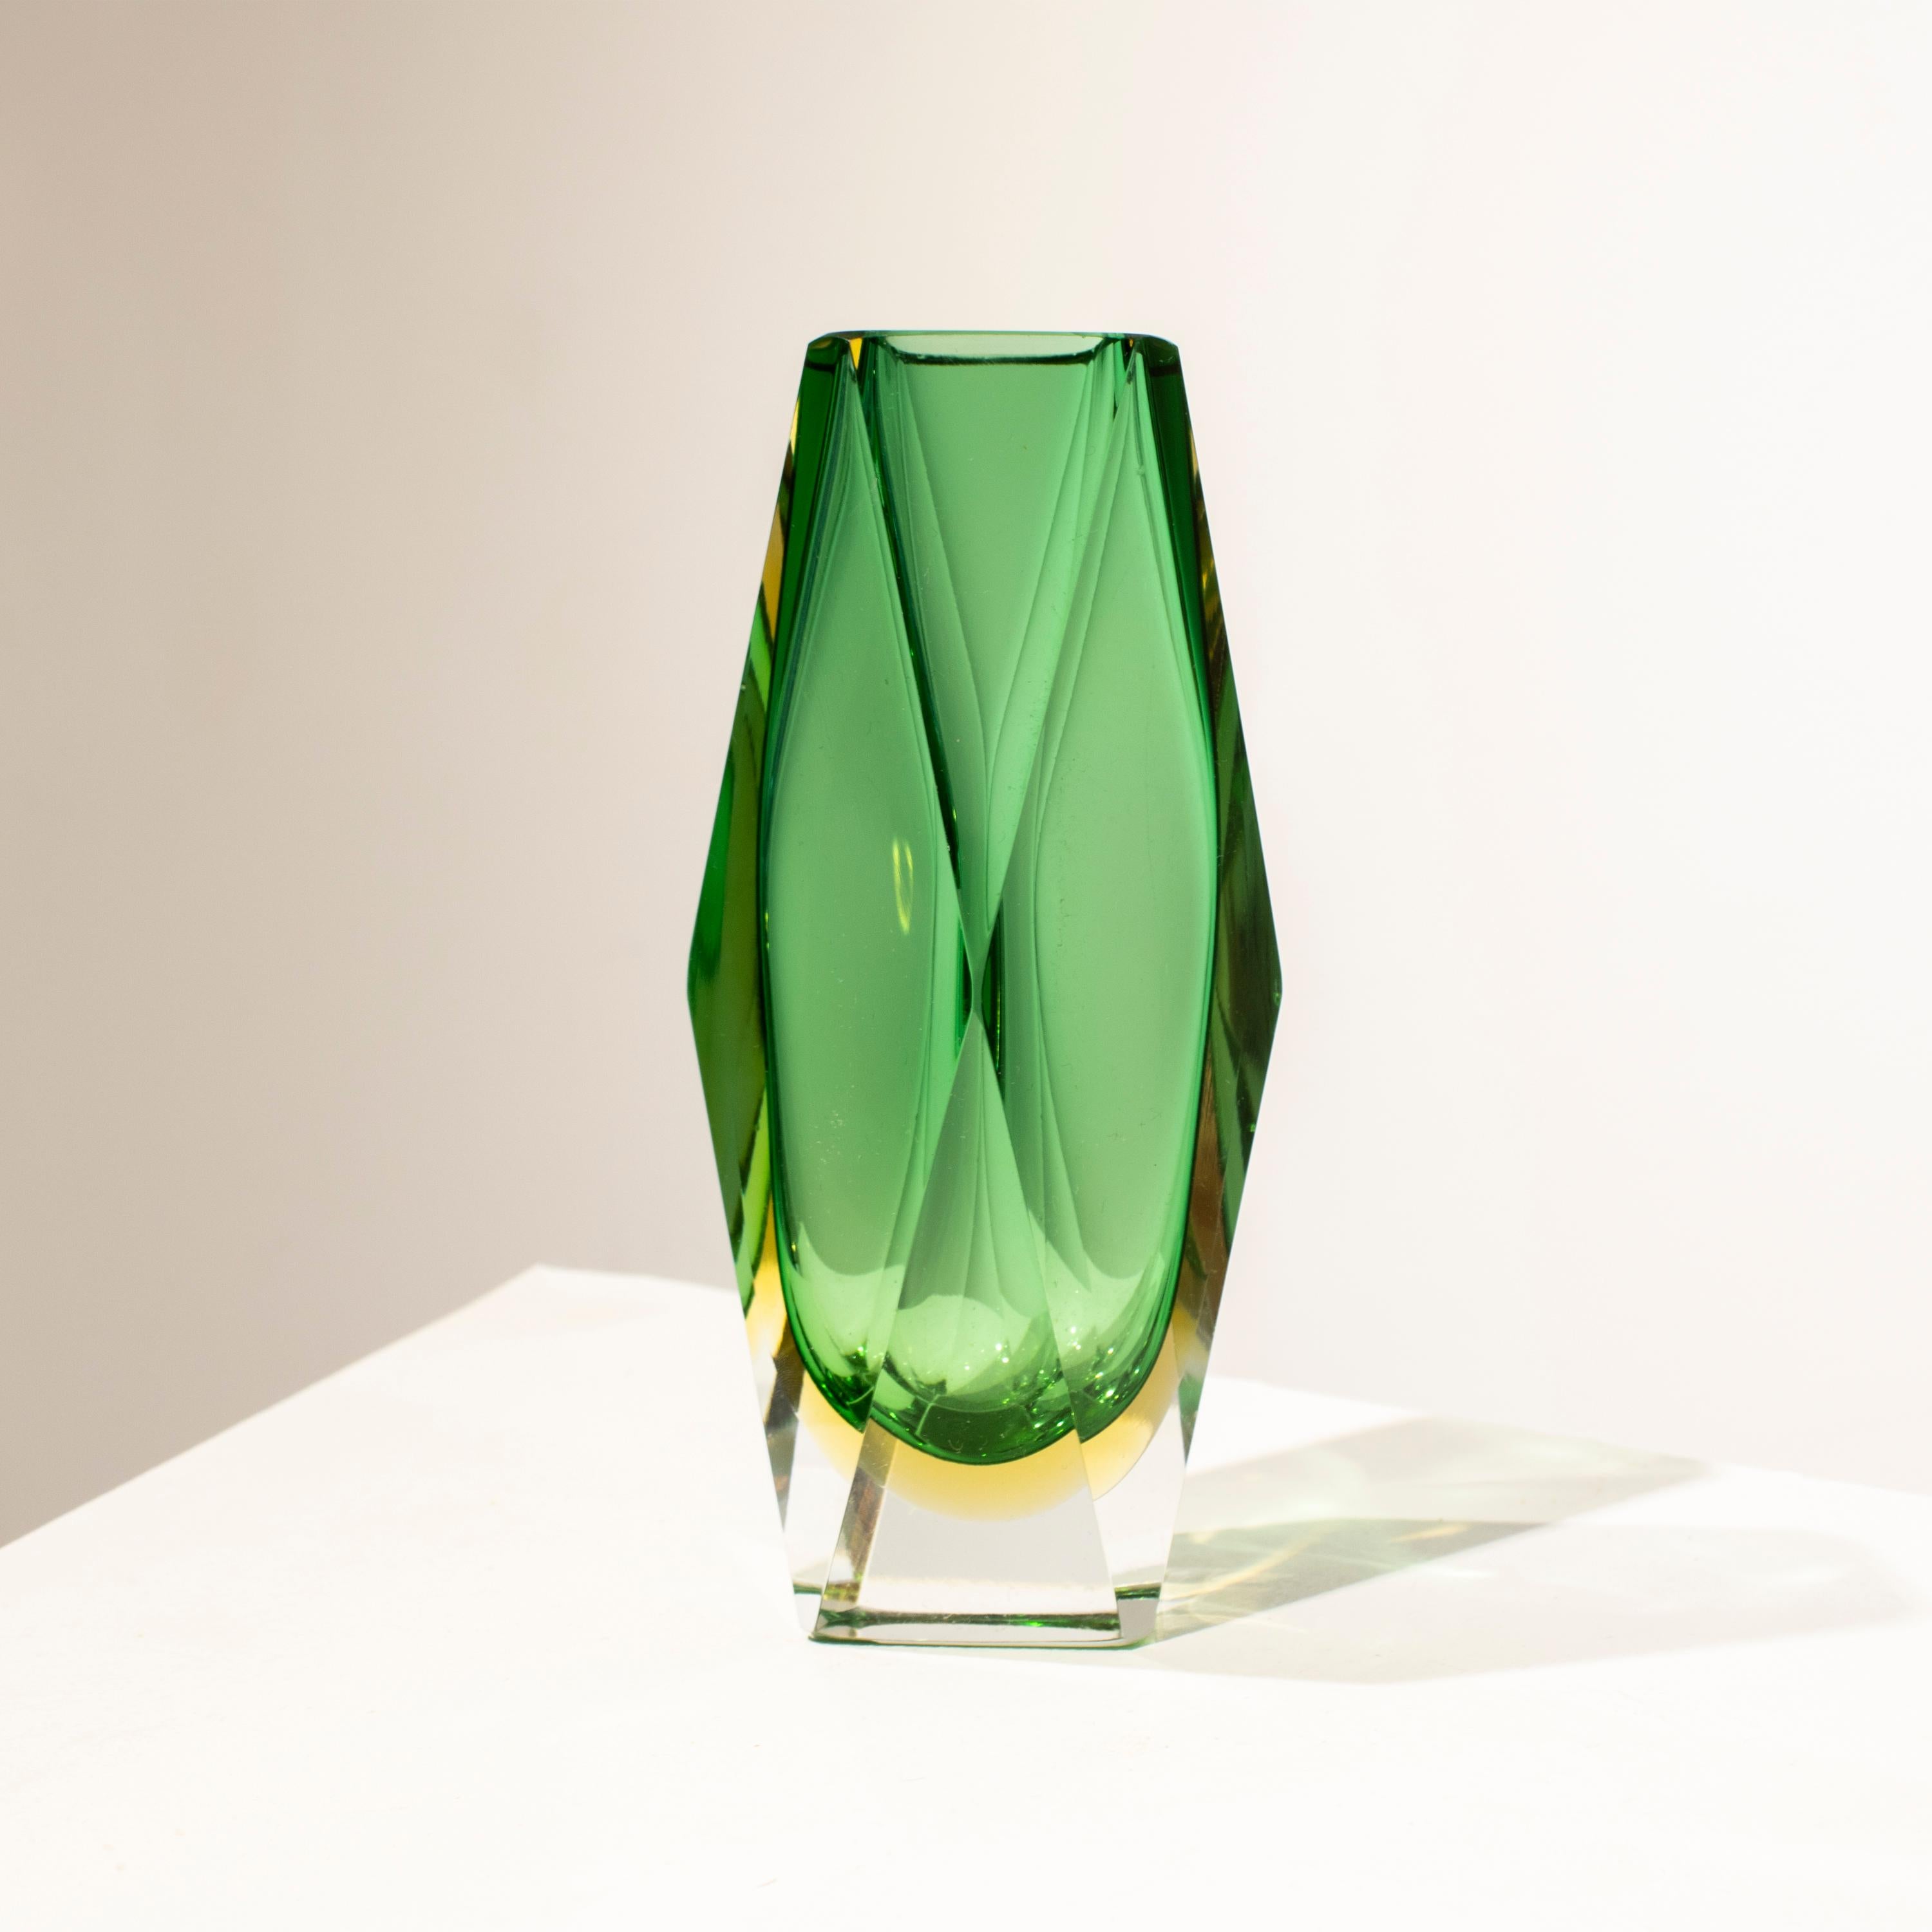 Mid-Century Modern Flavio Poli Hand-Crafted Green Murano Small Glass Vase, Italy, 1970 For Sale